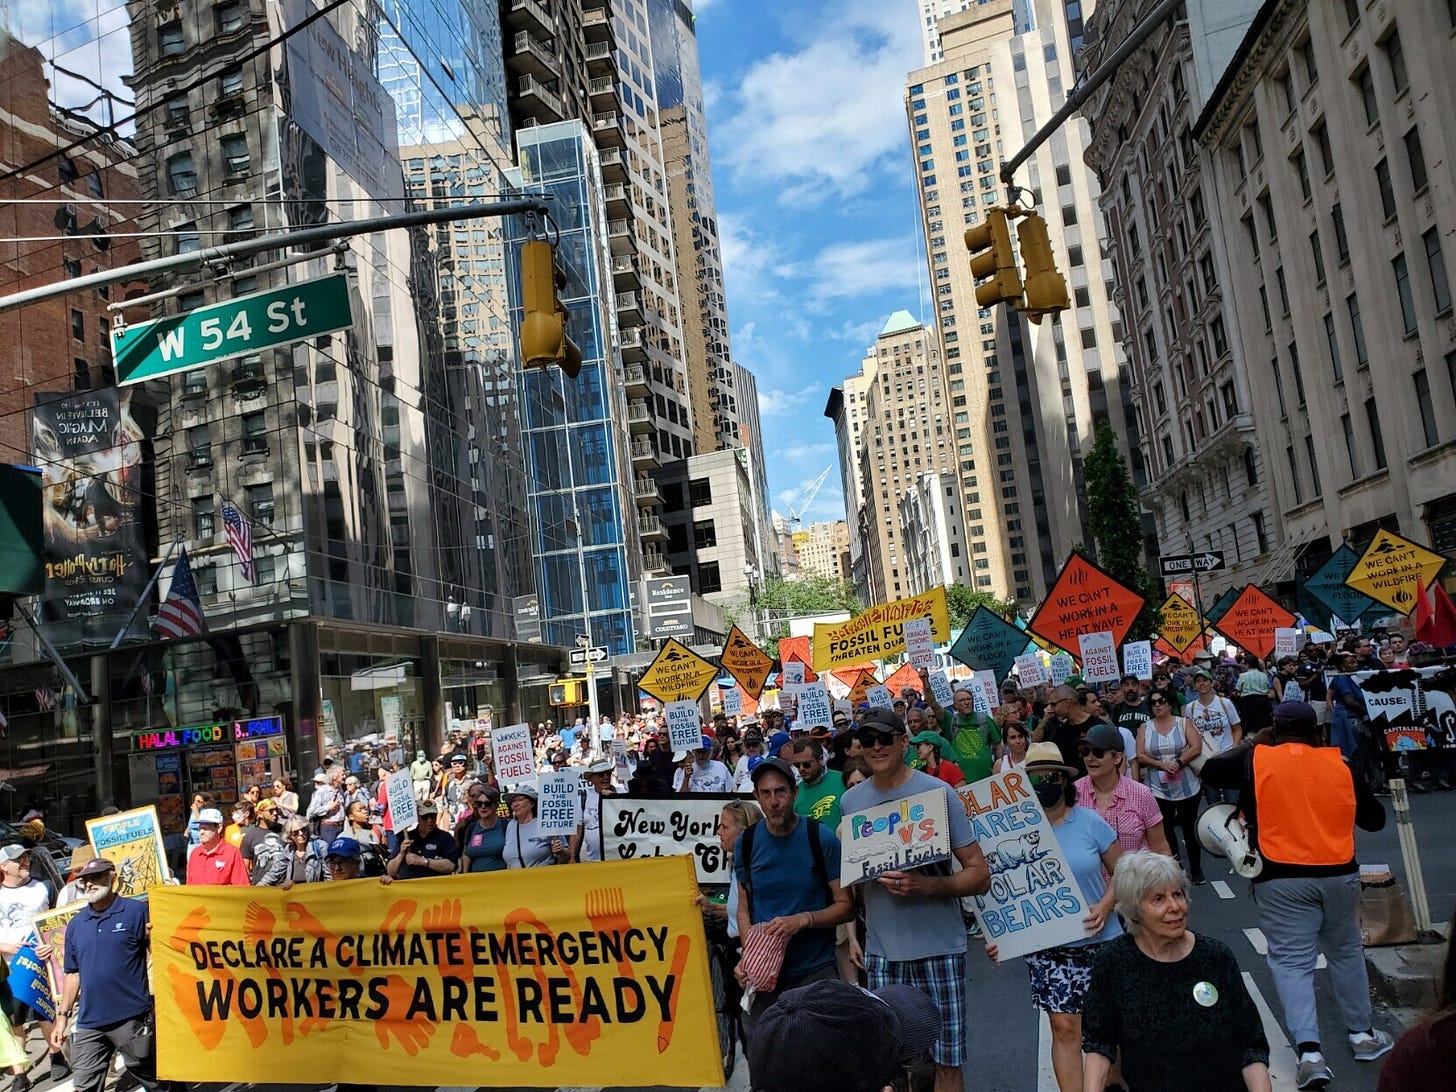 Declare a Climate Emergency: Workers Are Ready